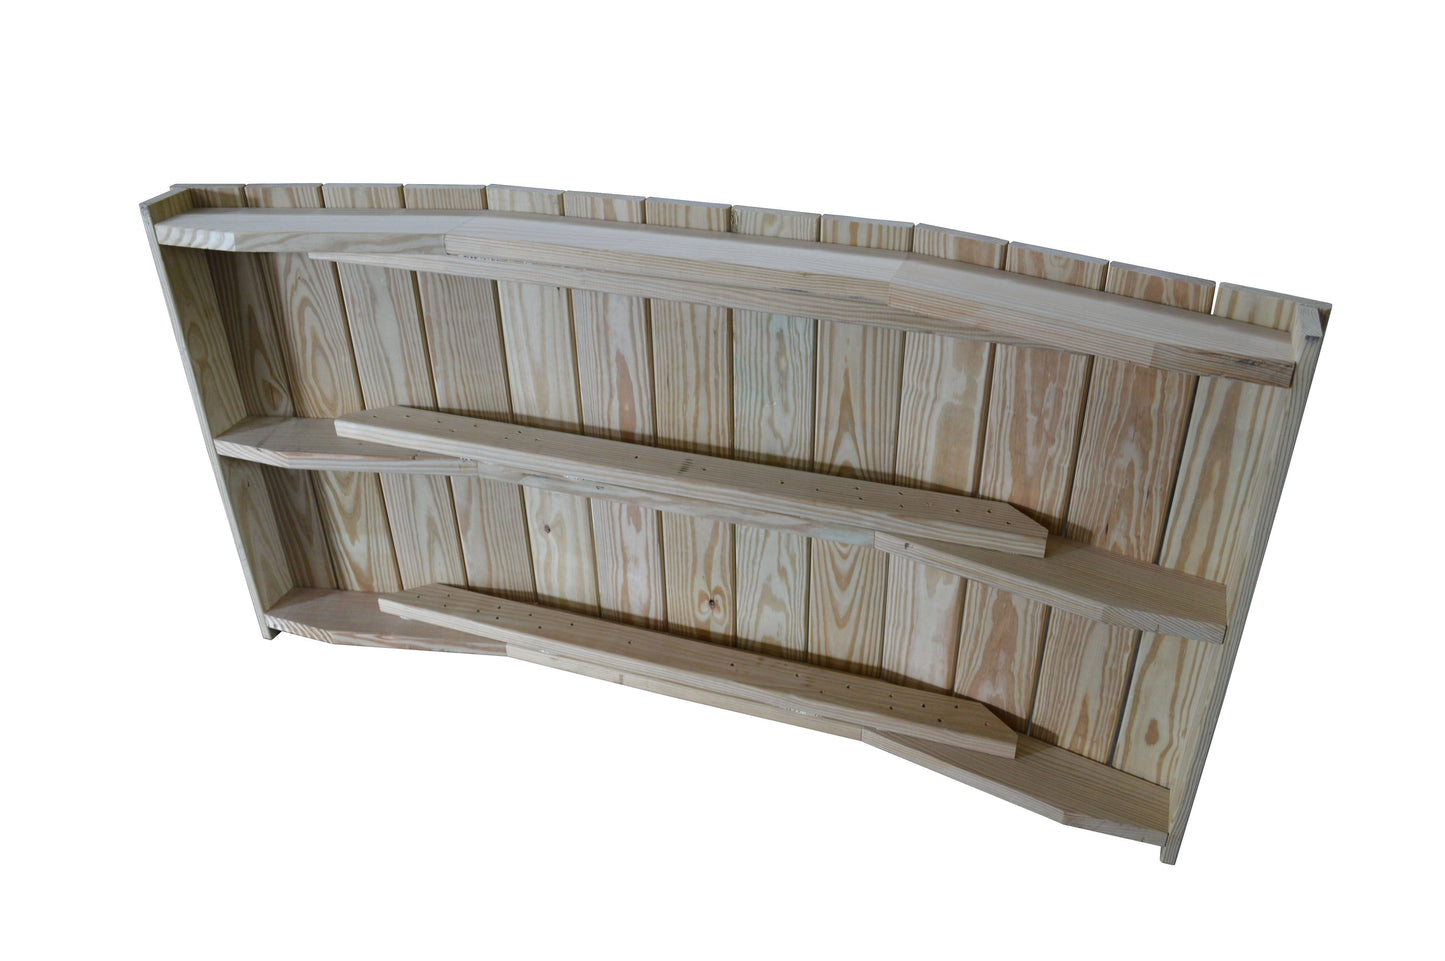 A&L Furniture Pressure Treated Pine 3'  x  6' Standard Plank Bridge - LEAD TIME TO SHIP 10 BUSINESS DAYS